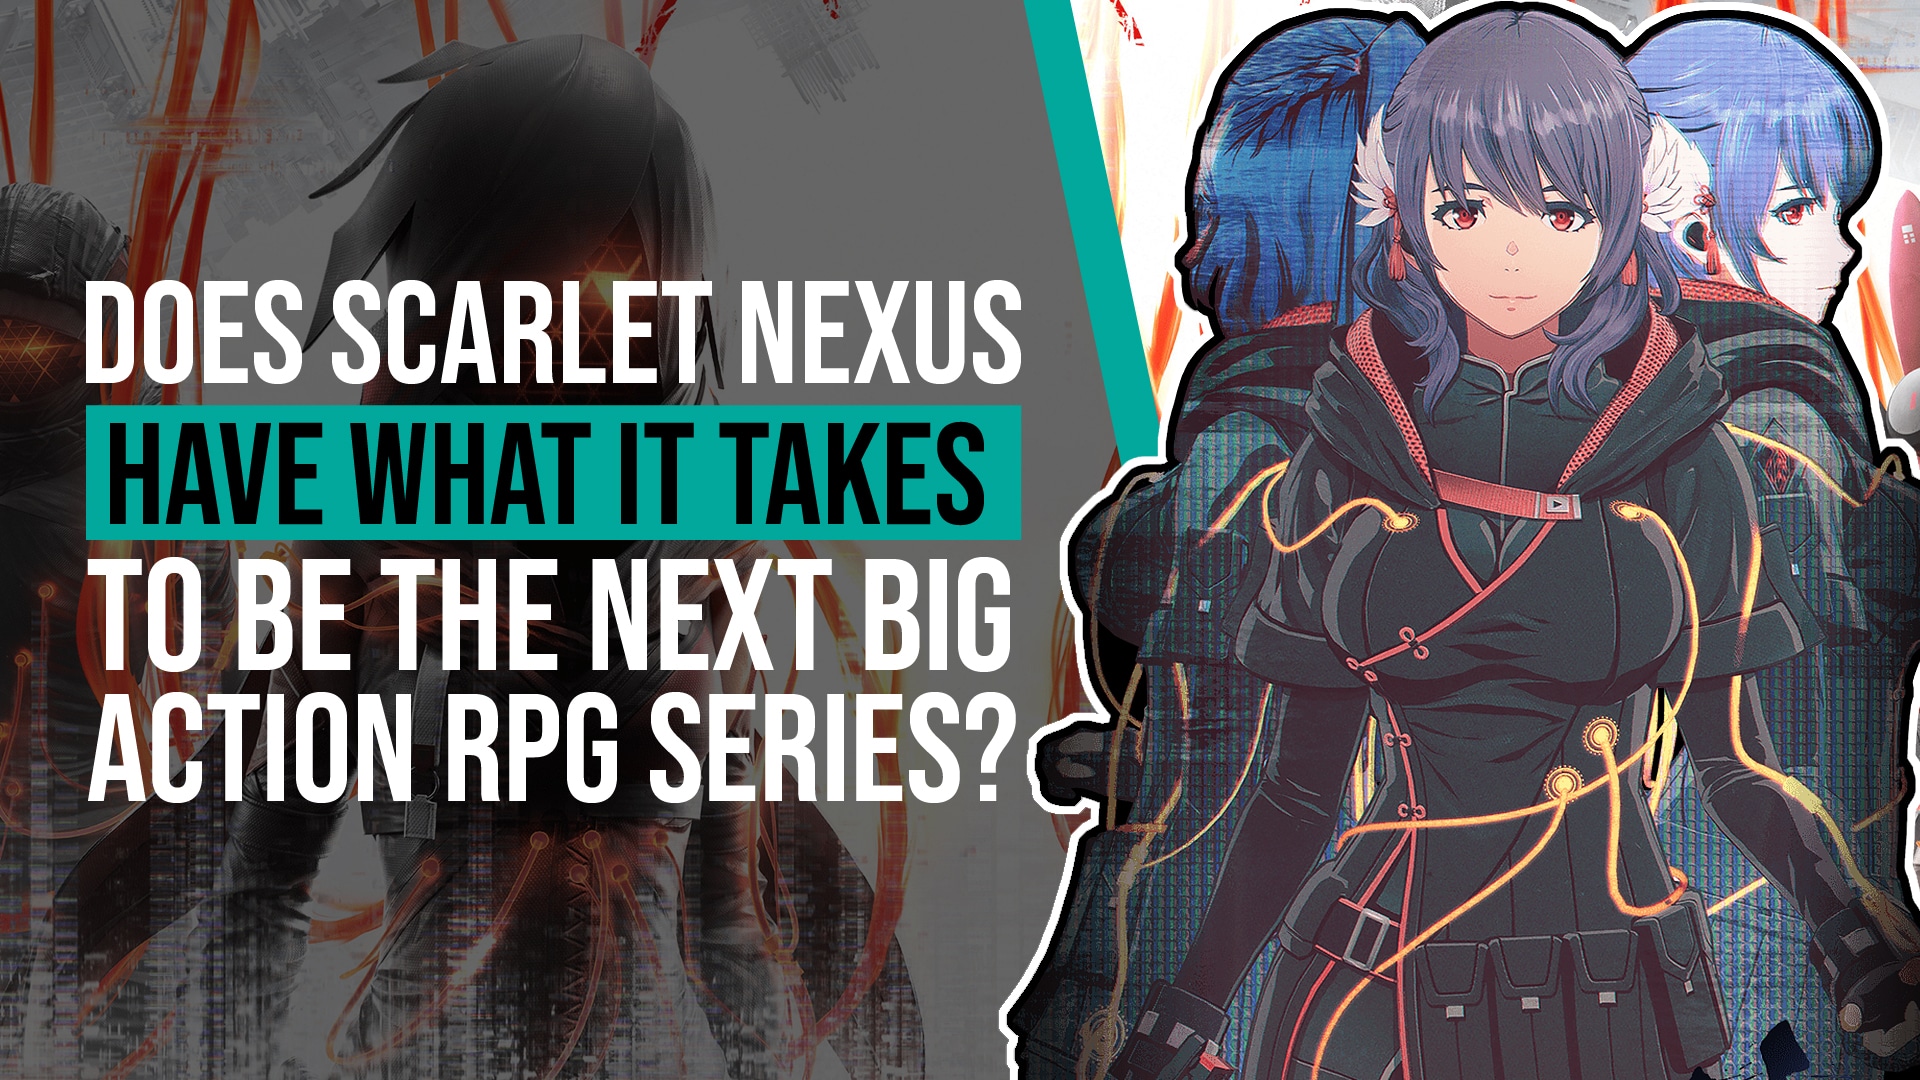 Scarlet Nexus is available now! It's a JRPG, mixed with Devil May